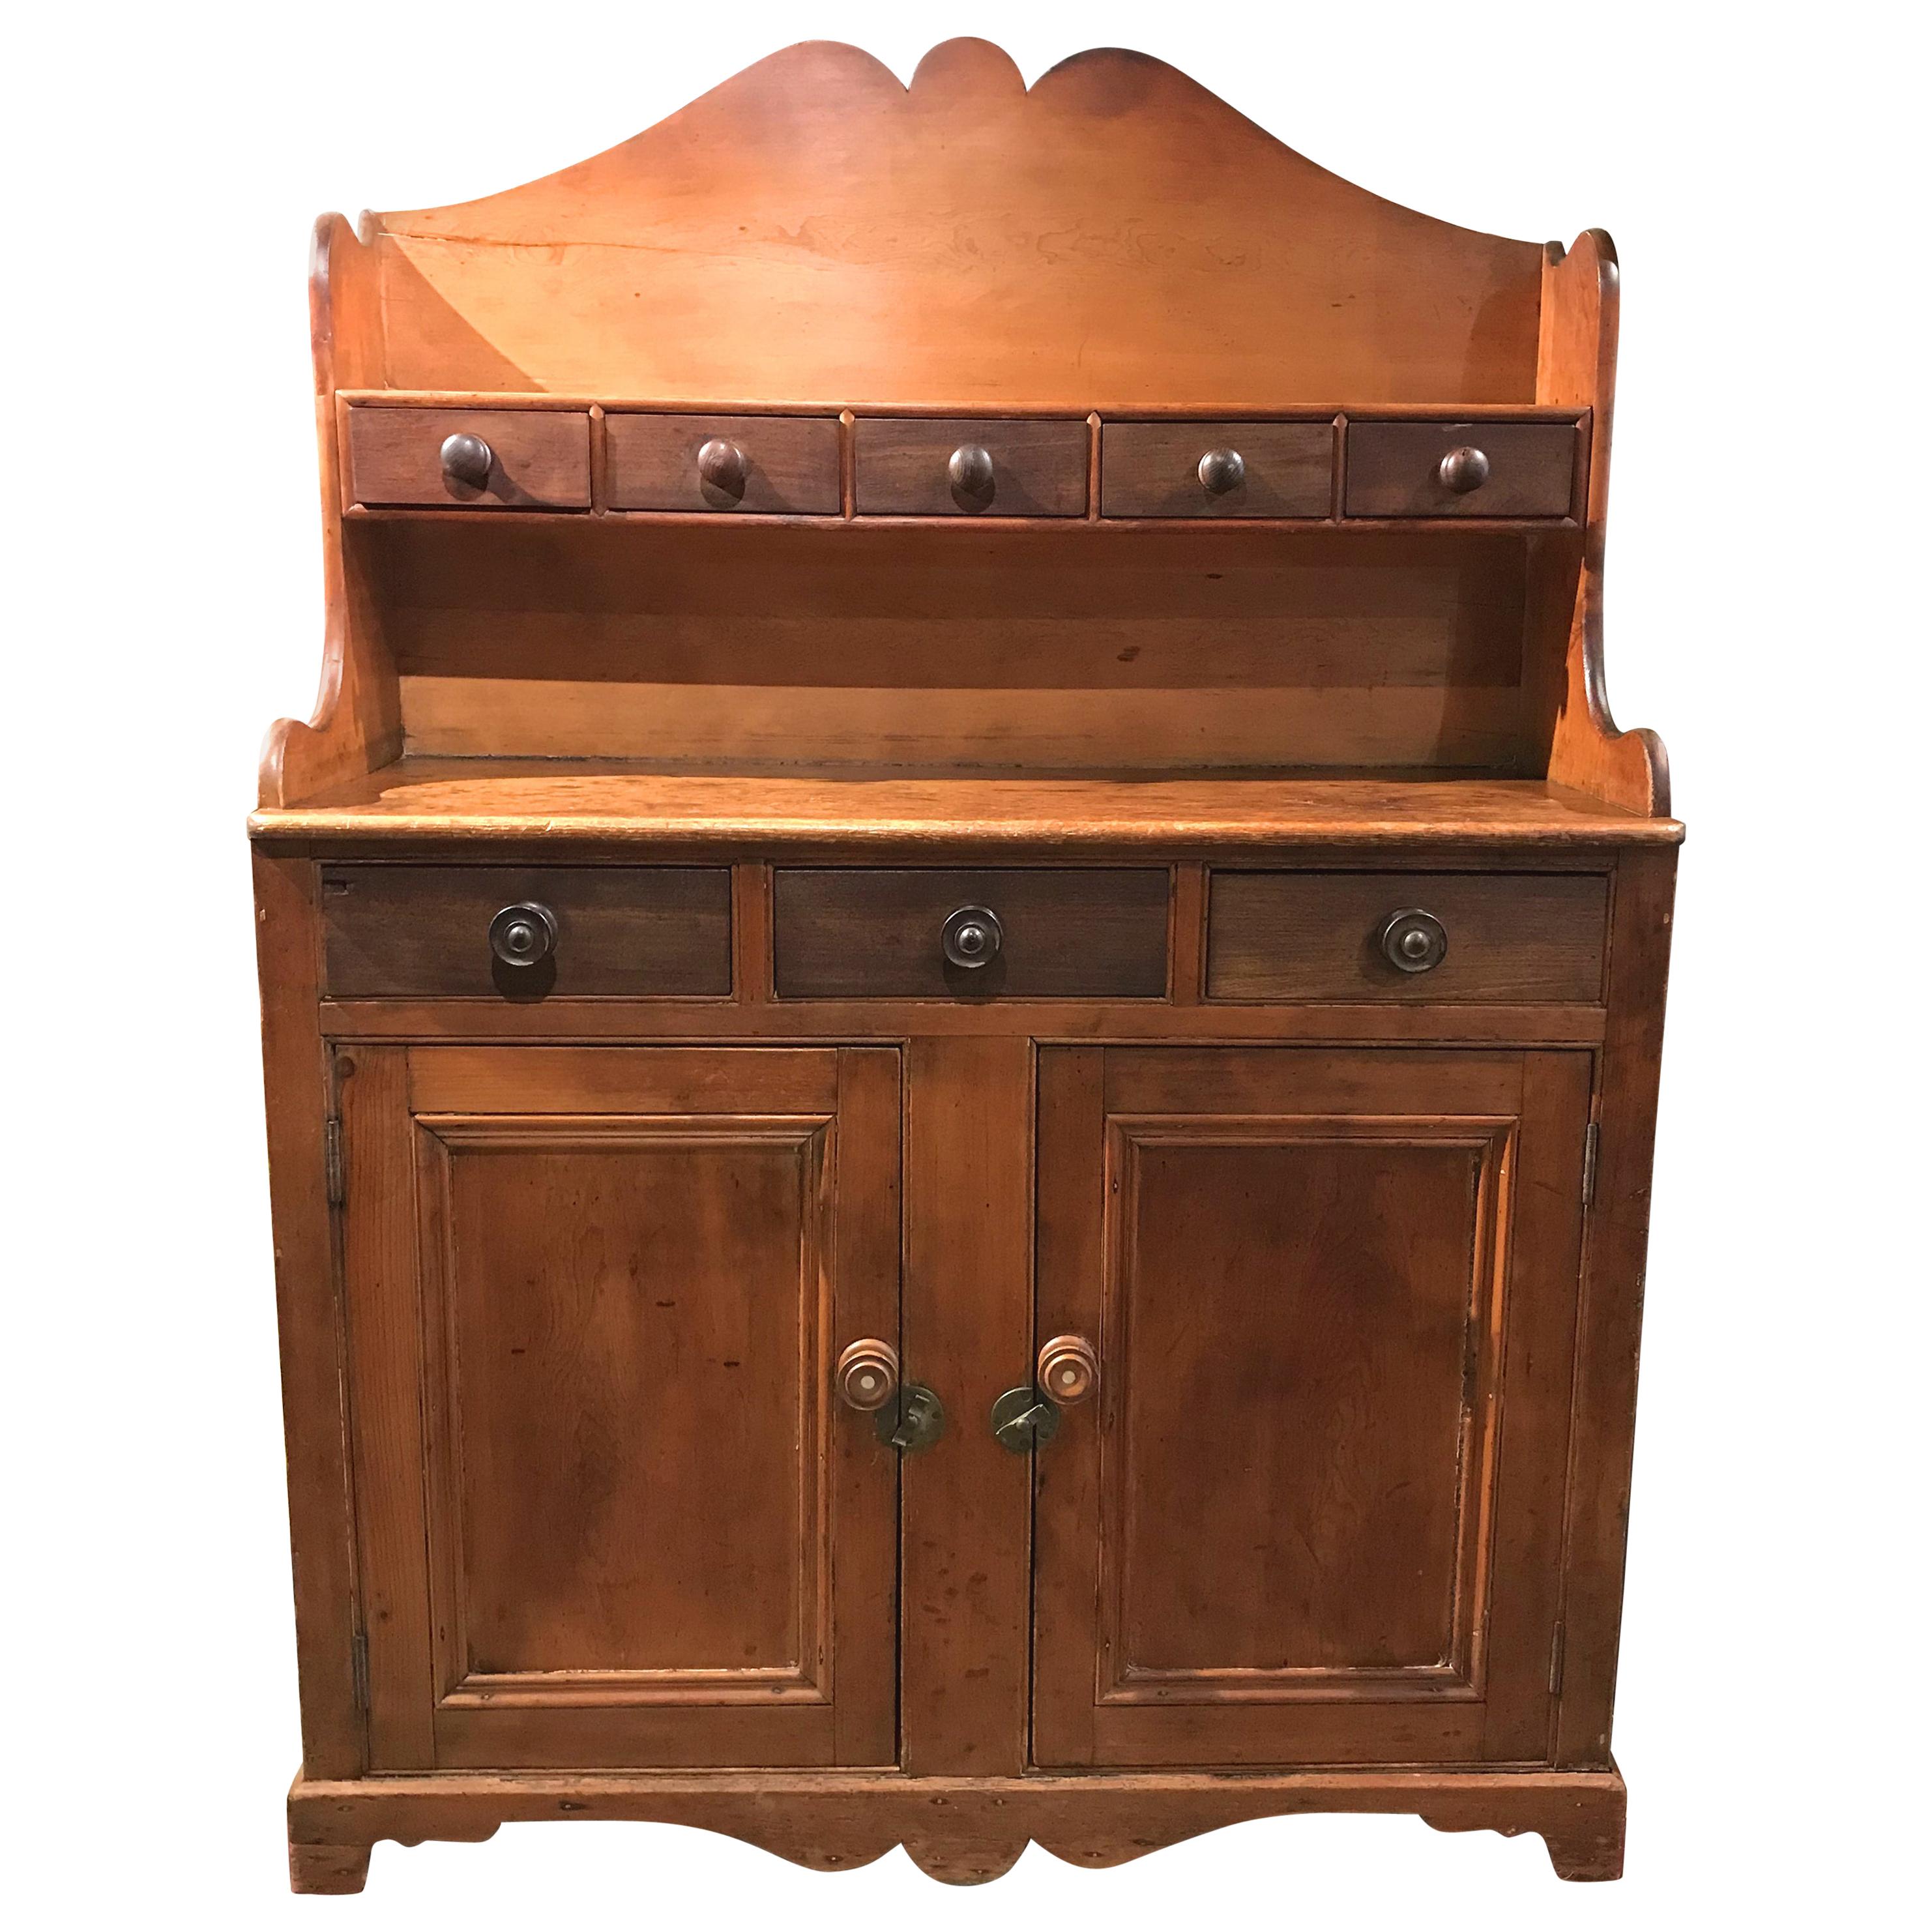 19th Century Country Step Back Server / Hutch or Cupboard, Possibly Canadian